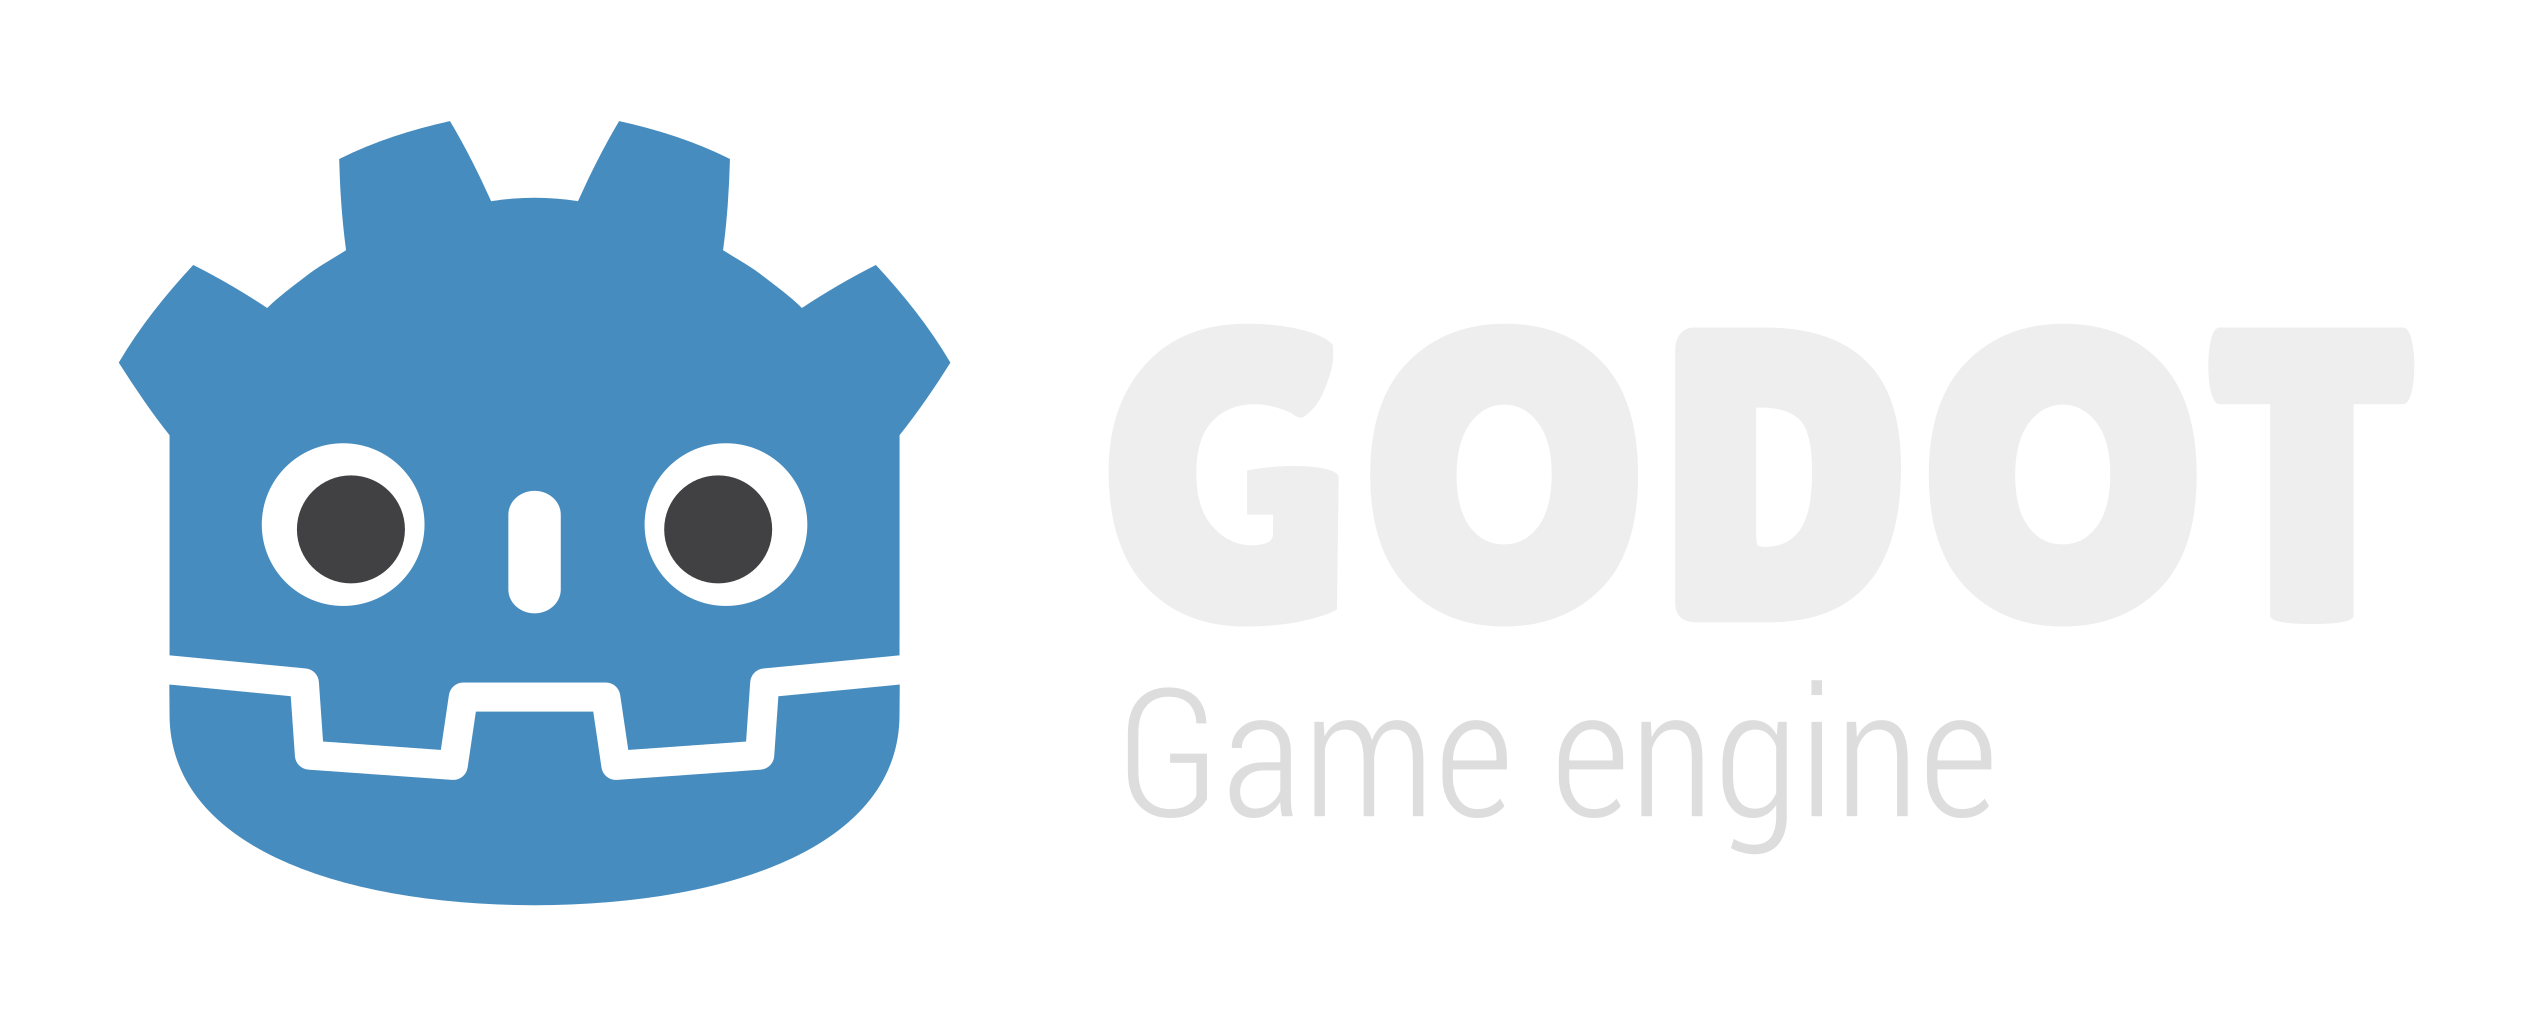 Made with the Godot Game Engine